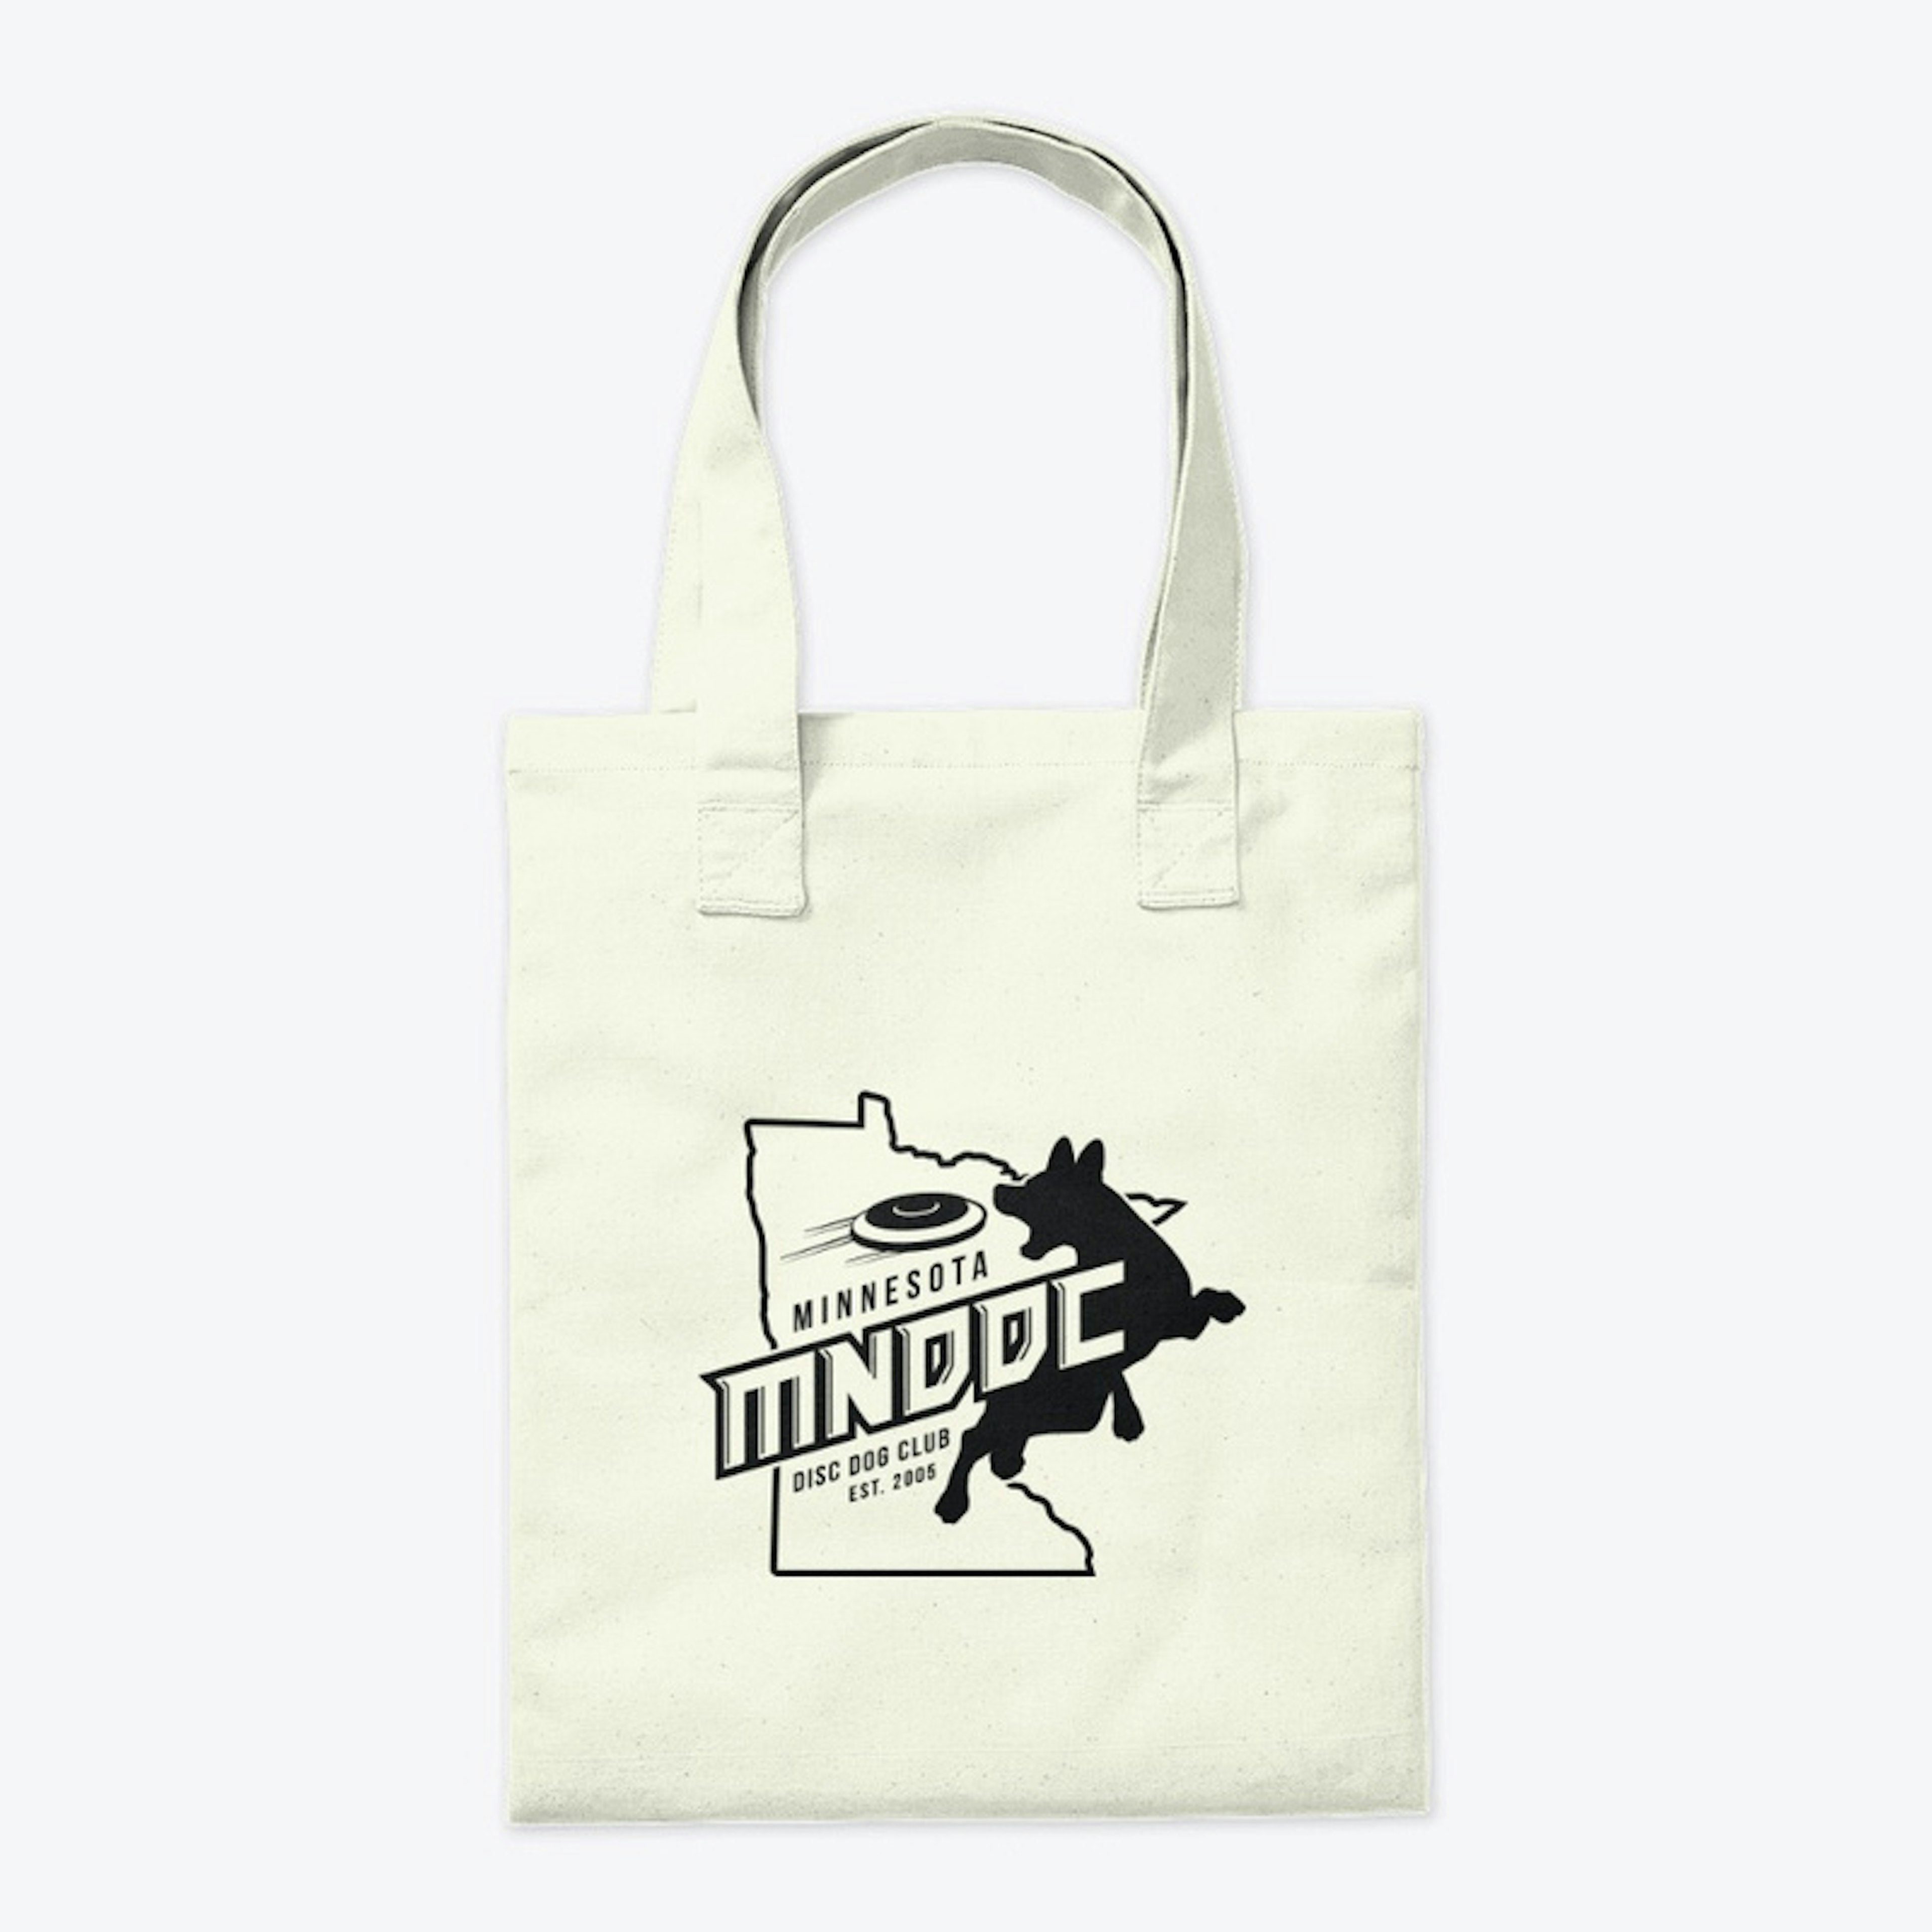 Double sided tote bag